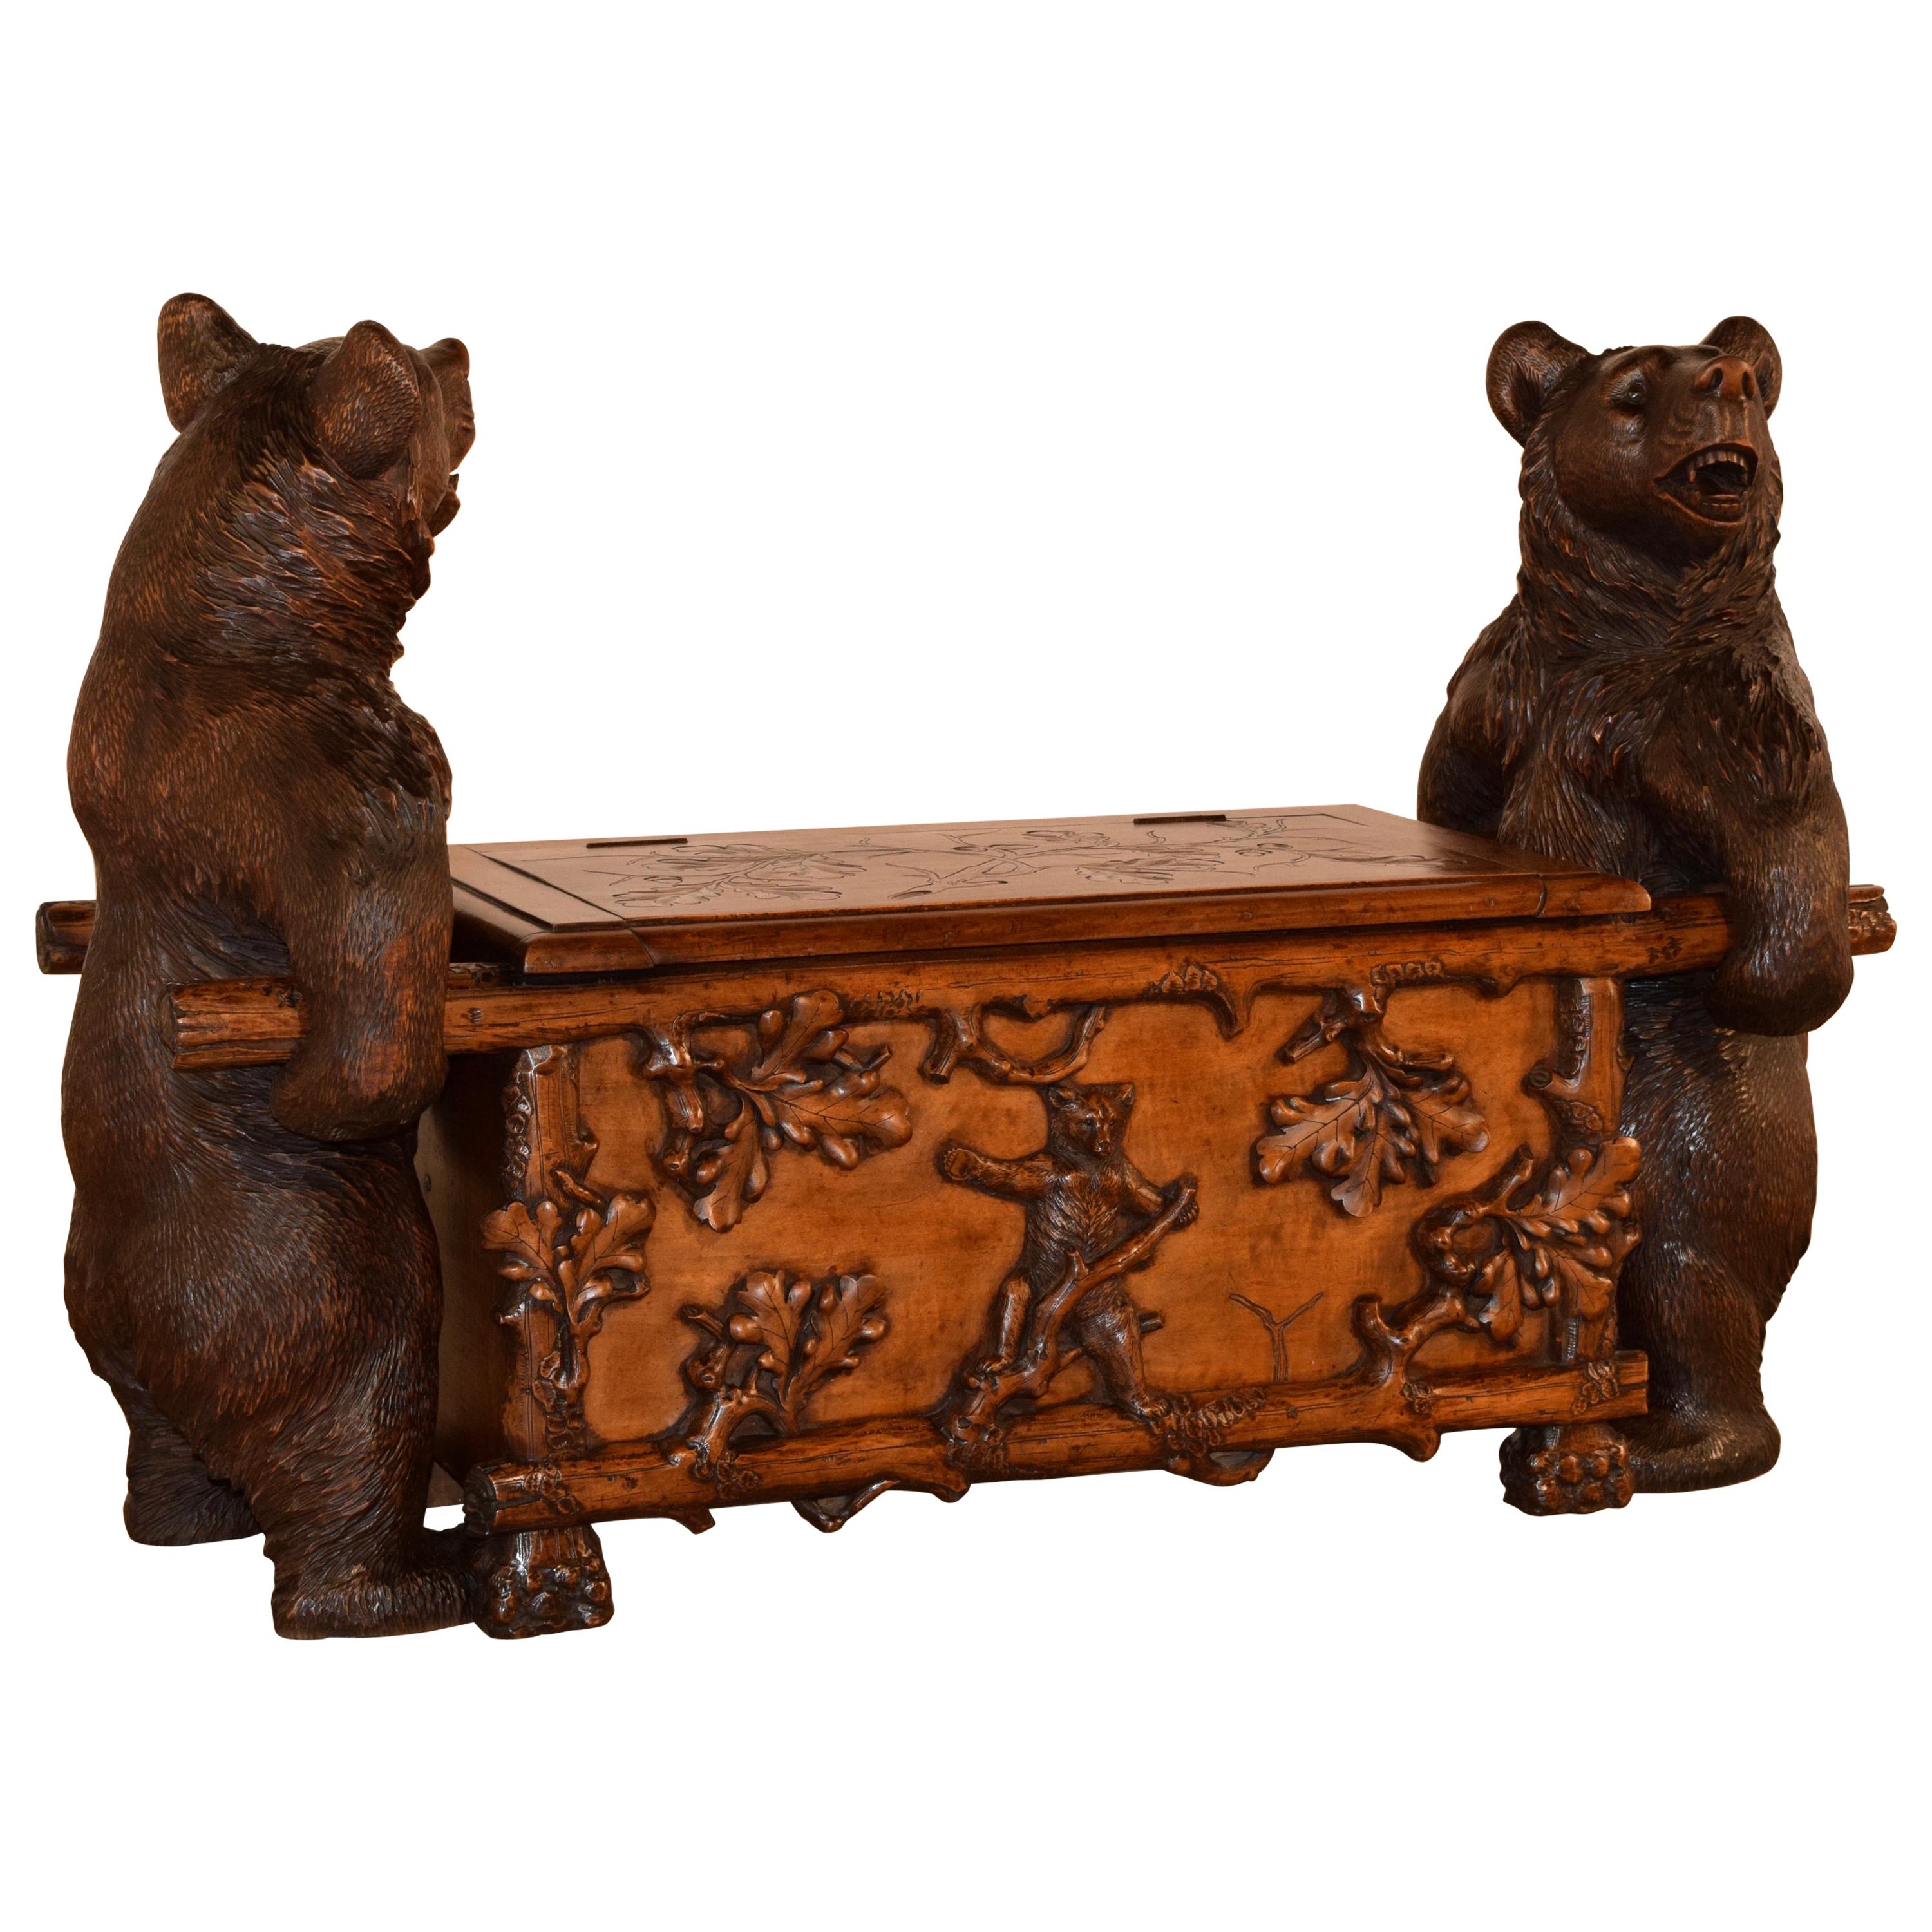 19th Century Black Forest Carved Unusual Bear Bench